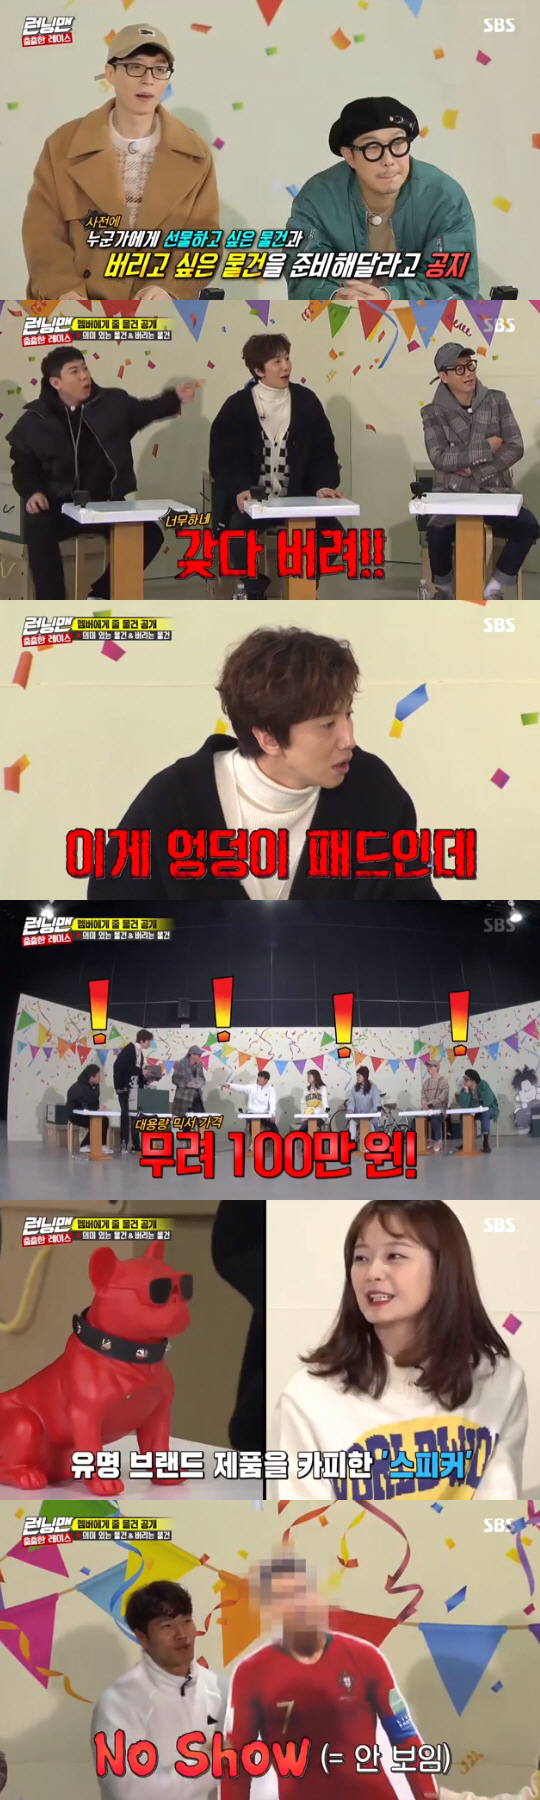 Jeon So-min has only won the wrong Gift while greedy for the best-priced product in Running Man history.SBS Running Man broadcasted on the 9th was a Race for the Haha of Ji Suk-jins Out and the essay Out by Jeon So-min.On this day, the members have prepared one thing they want to give up and one thing they want to throw away.First, Haha took out a holy machine that poured alcohol, saying, I brought it with my thoughts about Jeon So-min.As a thing to throw away, Kim Jong-kook was criticized for bringing a signboard of a restaurant operated with Kim Jong-kook.Yoo Jae-Suk has been preparing Yusan Slow Goods Package as a gift that he wants to get, and he has been actively promoting I will sign it.However, as for the items I want to throw away, I took a Halloween basket and was pointed out by the members as no castle.Song Ji-hyos Gift, which received the attention of its members, was also revealed; Song Ji-hyo prepared a bike for both the items he wanted to get and the one he wanted to throw away.But the bike conditions of the pole and pole made the members sulk; Jeon So-min took out a cheap lunch box directly with a meaningful gift that he could not sleep and prepared.As a thing I wanted to throw away, I took out a T-shirt printed with Kim Jong-kook photo and made it laugh.Ji Suk-jin, who brought his hip pad to Gift, added, I prepared thinking of Lee Kwang-soo, humiliating Lee Kwang-soo.I also laughed at the United States of America navigation I used 10 years ago as a thing I wanted to abandon.Lee Kwang-soo was surprised to bring a high-priced, high-capacity mixer to Gift.The things I wanted to throw away were size 300 Ugg boots and a Halloween package received by Haha nine years ago, and I got a dramatic and dramatic response.Yang Se-chan brought in a soda machine that he wanted to Gift; and then, as a product he wanted to dump, he prepared a speaker that copied a famous branded product.The identity of the copy speaker, which shocked everyone with the sound quality that was not even speaker phone, was revealed as Lee Kwang-soo and added laughter.Kim Jong-kook prepared a massager reminiscent of a weapon with a meaningful Gift; then, with a Cristiano Ronaldo lighthouse as a thing he wanted to throw away, he was devastated.The members who saw Kim Jong-kooks abandonment of the goods laughed at the rejection of I do not want to carry it.The Race, which was held on the day, was a race for the Haha, which celebrated the birthday of Ji Suk-jin and the publication of the essay by Jeon So-min.The first mission was a mission in which a team that found and ate longer menu names among the actual foods sold in downtown Seoul within 100 minutes of the time limit won.The Ji Suk-jin team were convinced of the win after finding a restaurant with a 22-letter menu.However, the Jeon So-min team found a 27-letter menu, and Haha of the Ji Suk-jin team urgently contacted a friend who runs the restaurant and asked him to make a long name of Bibim cold noodles and put it on the menu.The result was a 47-letter menu; however, the crew shouted mission failure in consideration of equity with their opponents, and the Ji Suk-jin team lost to the Jeon So-min team.The second mission was to get the CF ambassador of memories.Ji Suk-jin seemed to have been ahead of Ji Suk-jins performance, but later, Jeon So-min team reversed and won the second round consecutive victory.On the other hand, Jeon So-min, the team leader of the victory team, was given the opportunity to get all the meaningful Gift prepared by the team members or receive 100-inch TV worth 8 million won with a 50% probability.Jeon So-min did not hesitate to Choice the 100-inch TV with a 50% probability instead of the members Gift.But Jeon So-mins double-uniform Choices were blue and eventually he forced his way through the 3-inch United States of America navigation, which Ji Suk-jin brought with him as a Gift he wanted to abandon instead of a 100-inch TV.In addition, there was no 100-inch TV product in the first place on the race, and Jeon So-min, who learned late on the Hidden Rule that the team members would not receive any product badges as the team leader became greedy, said, I will live nicely.